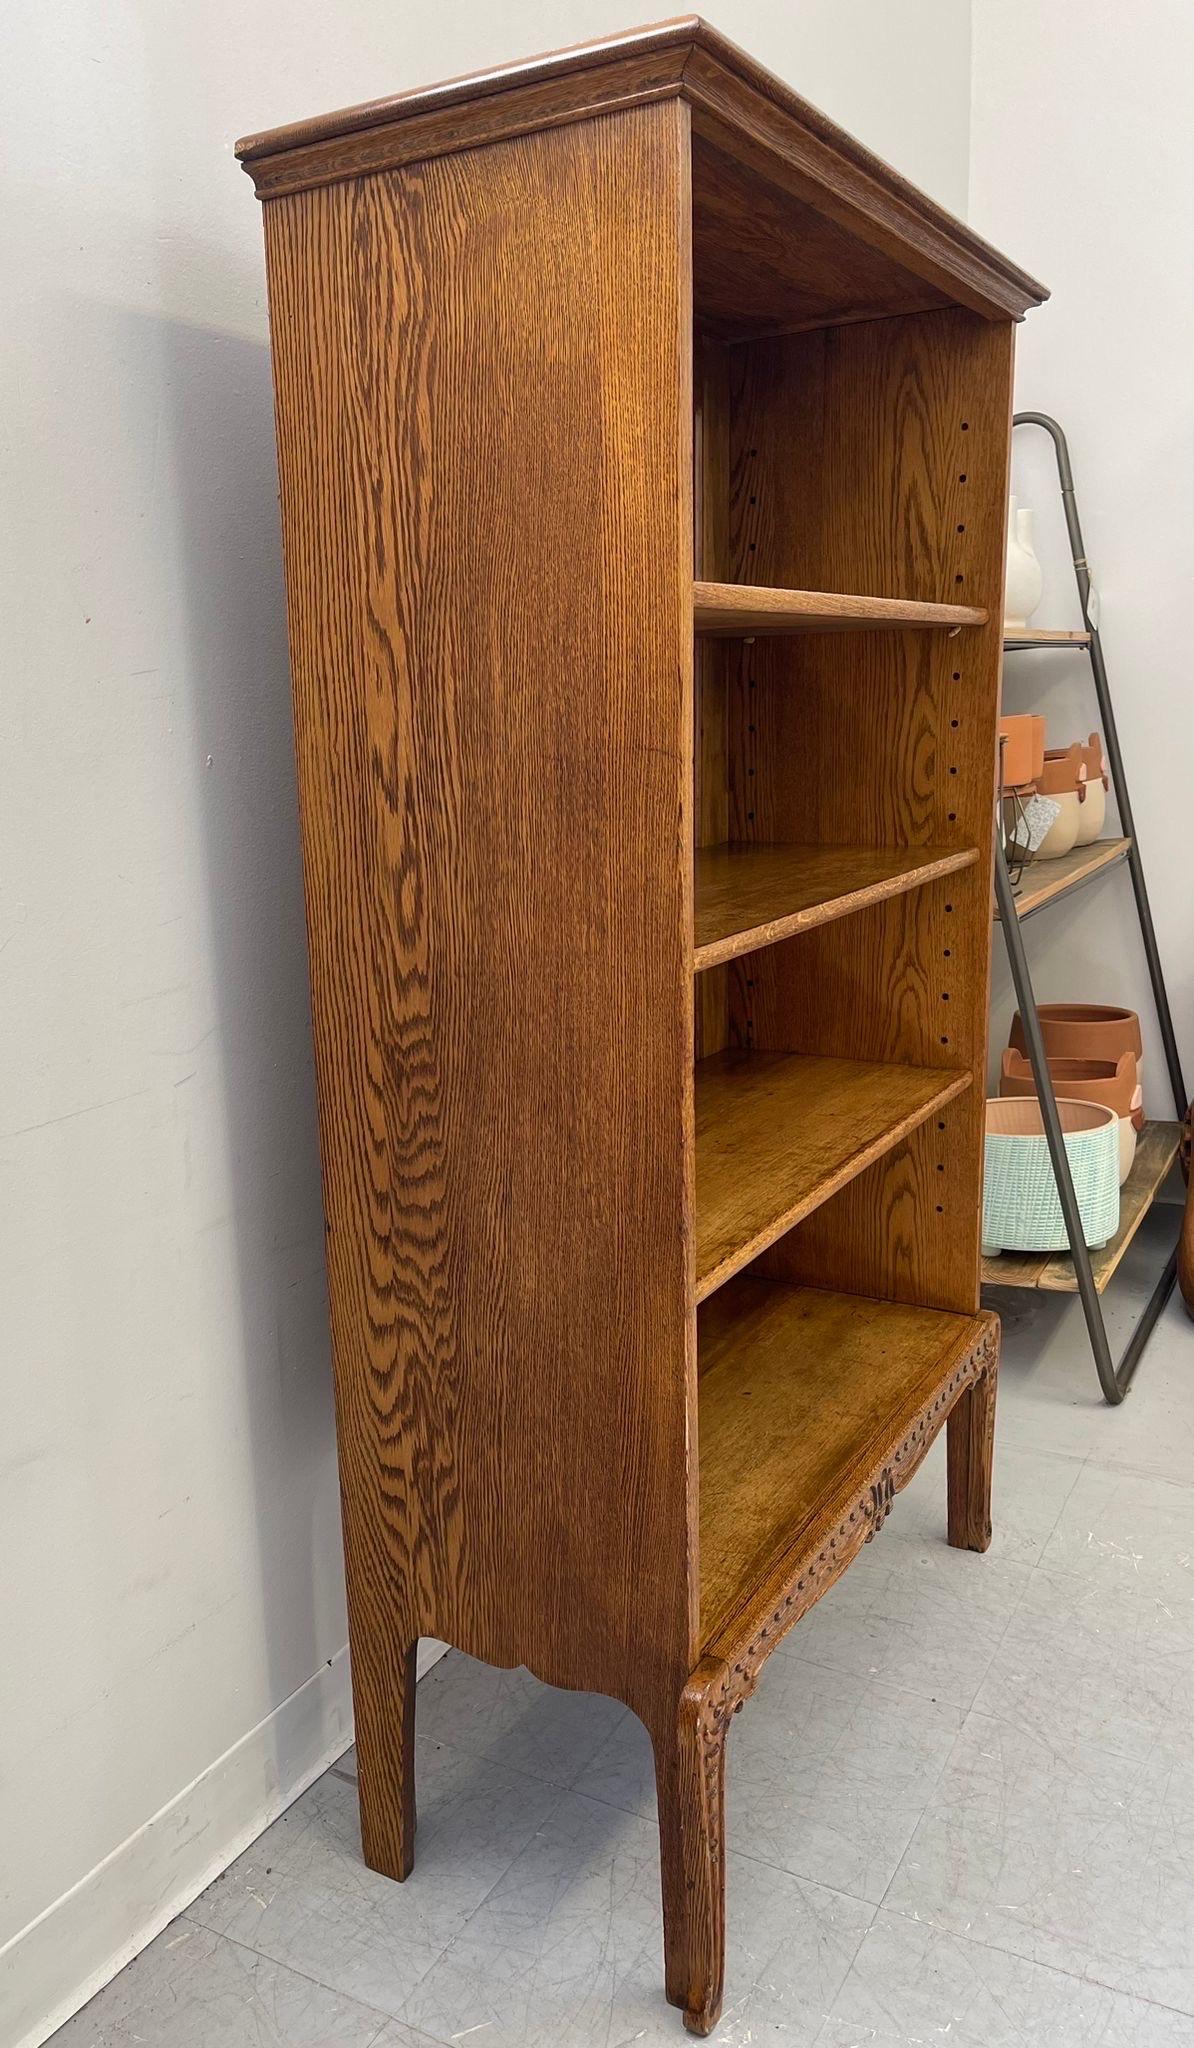 Late 20th Century Vintage Bookshelf With Carved Wood Accents .